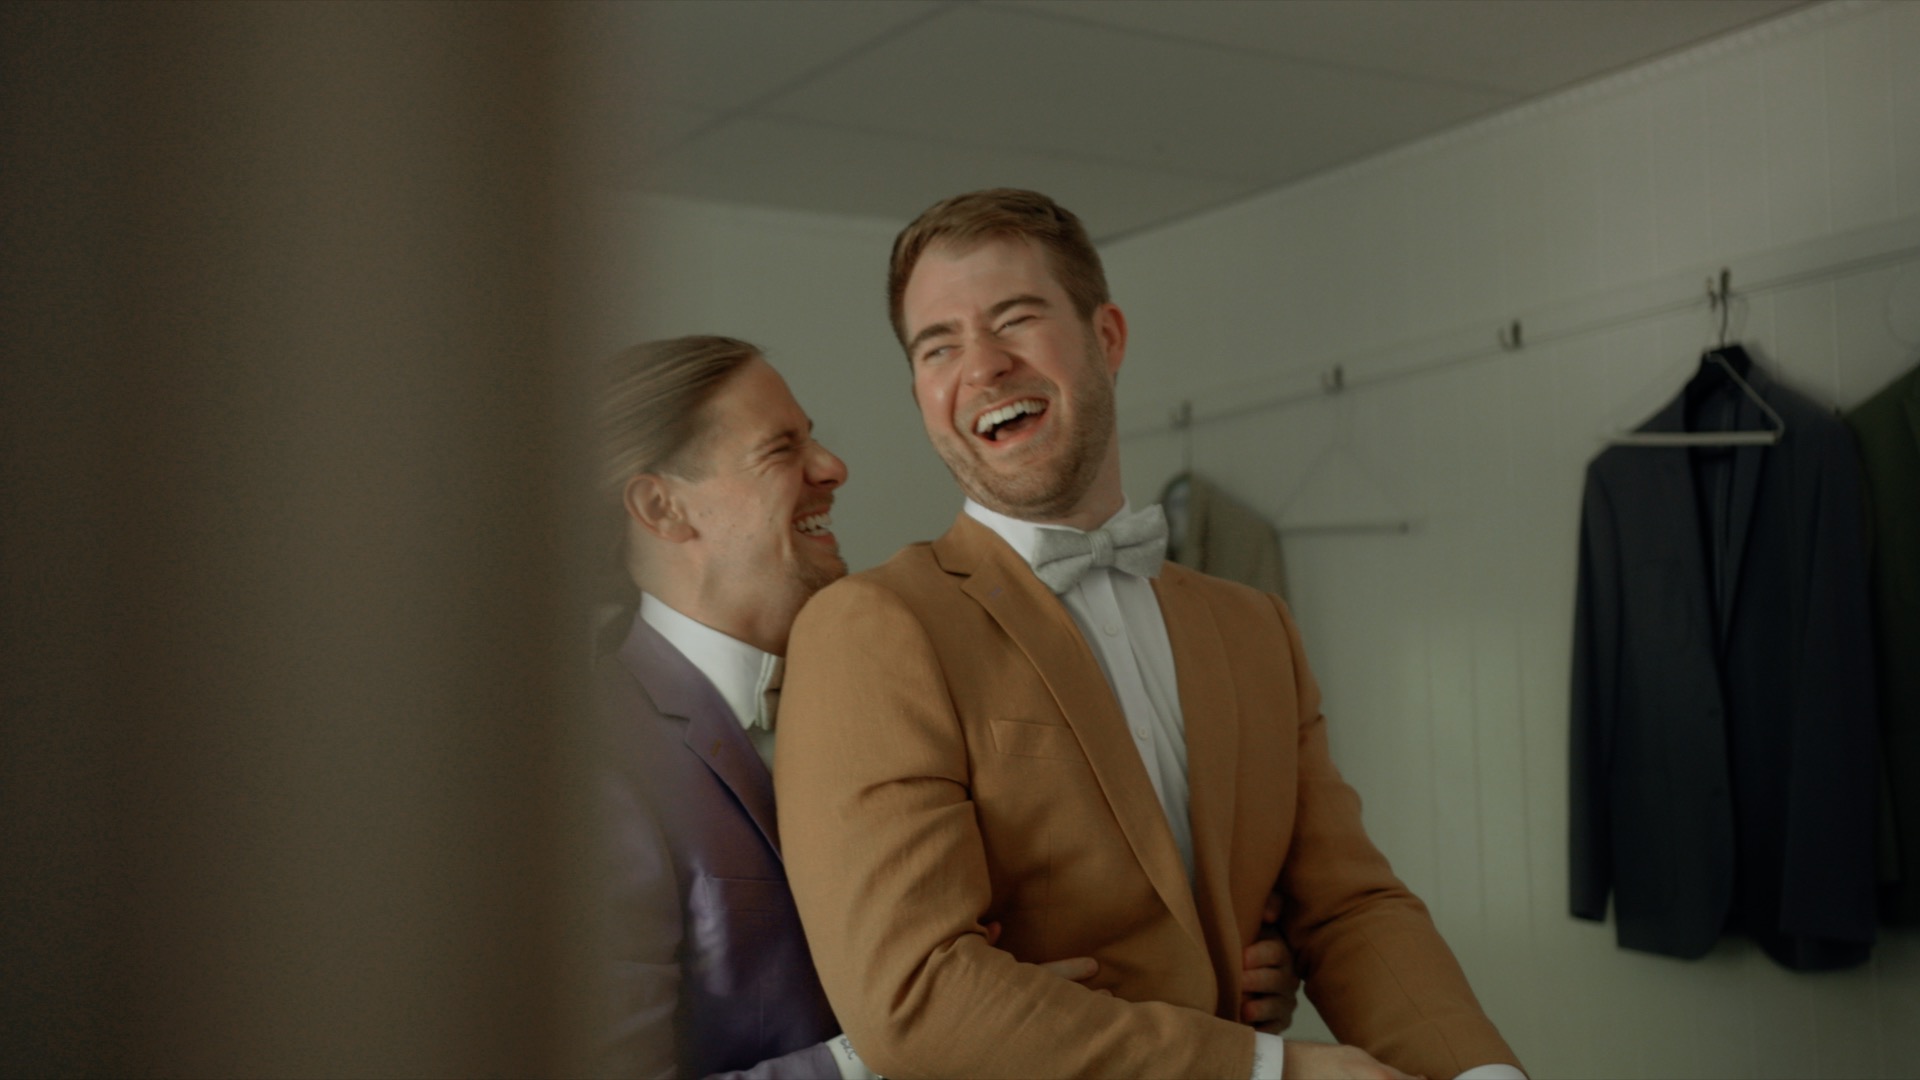 two grooms helping each other get ready at their wedding